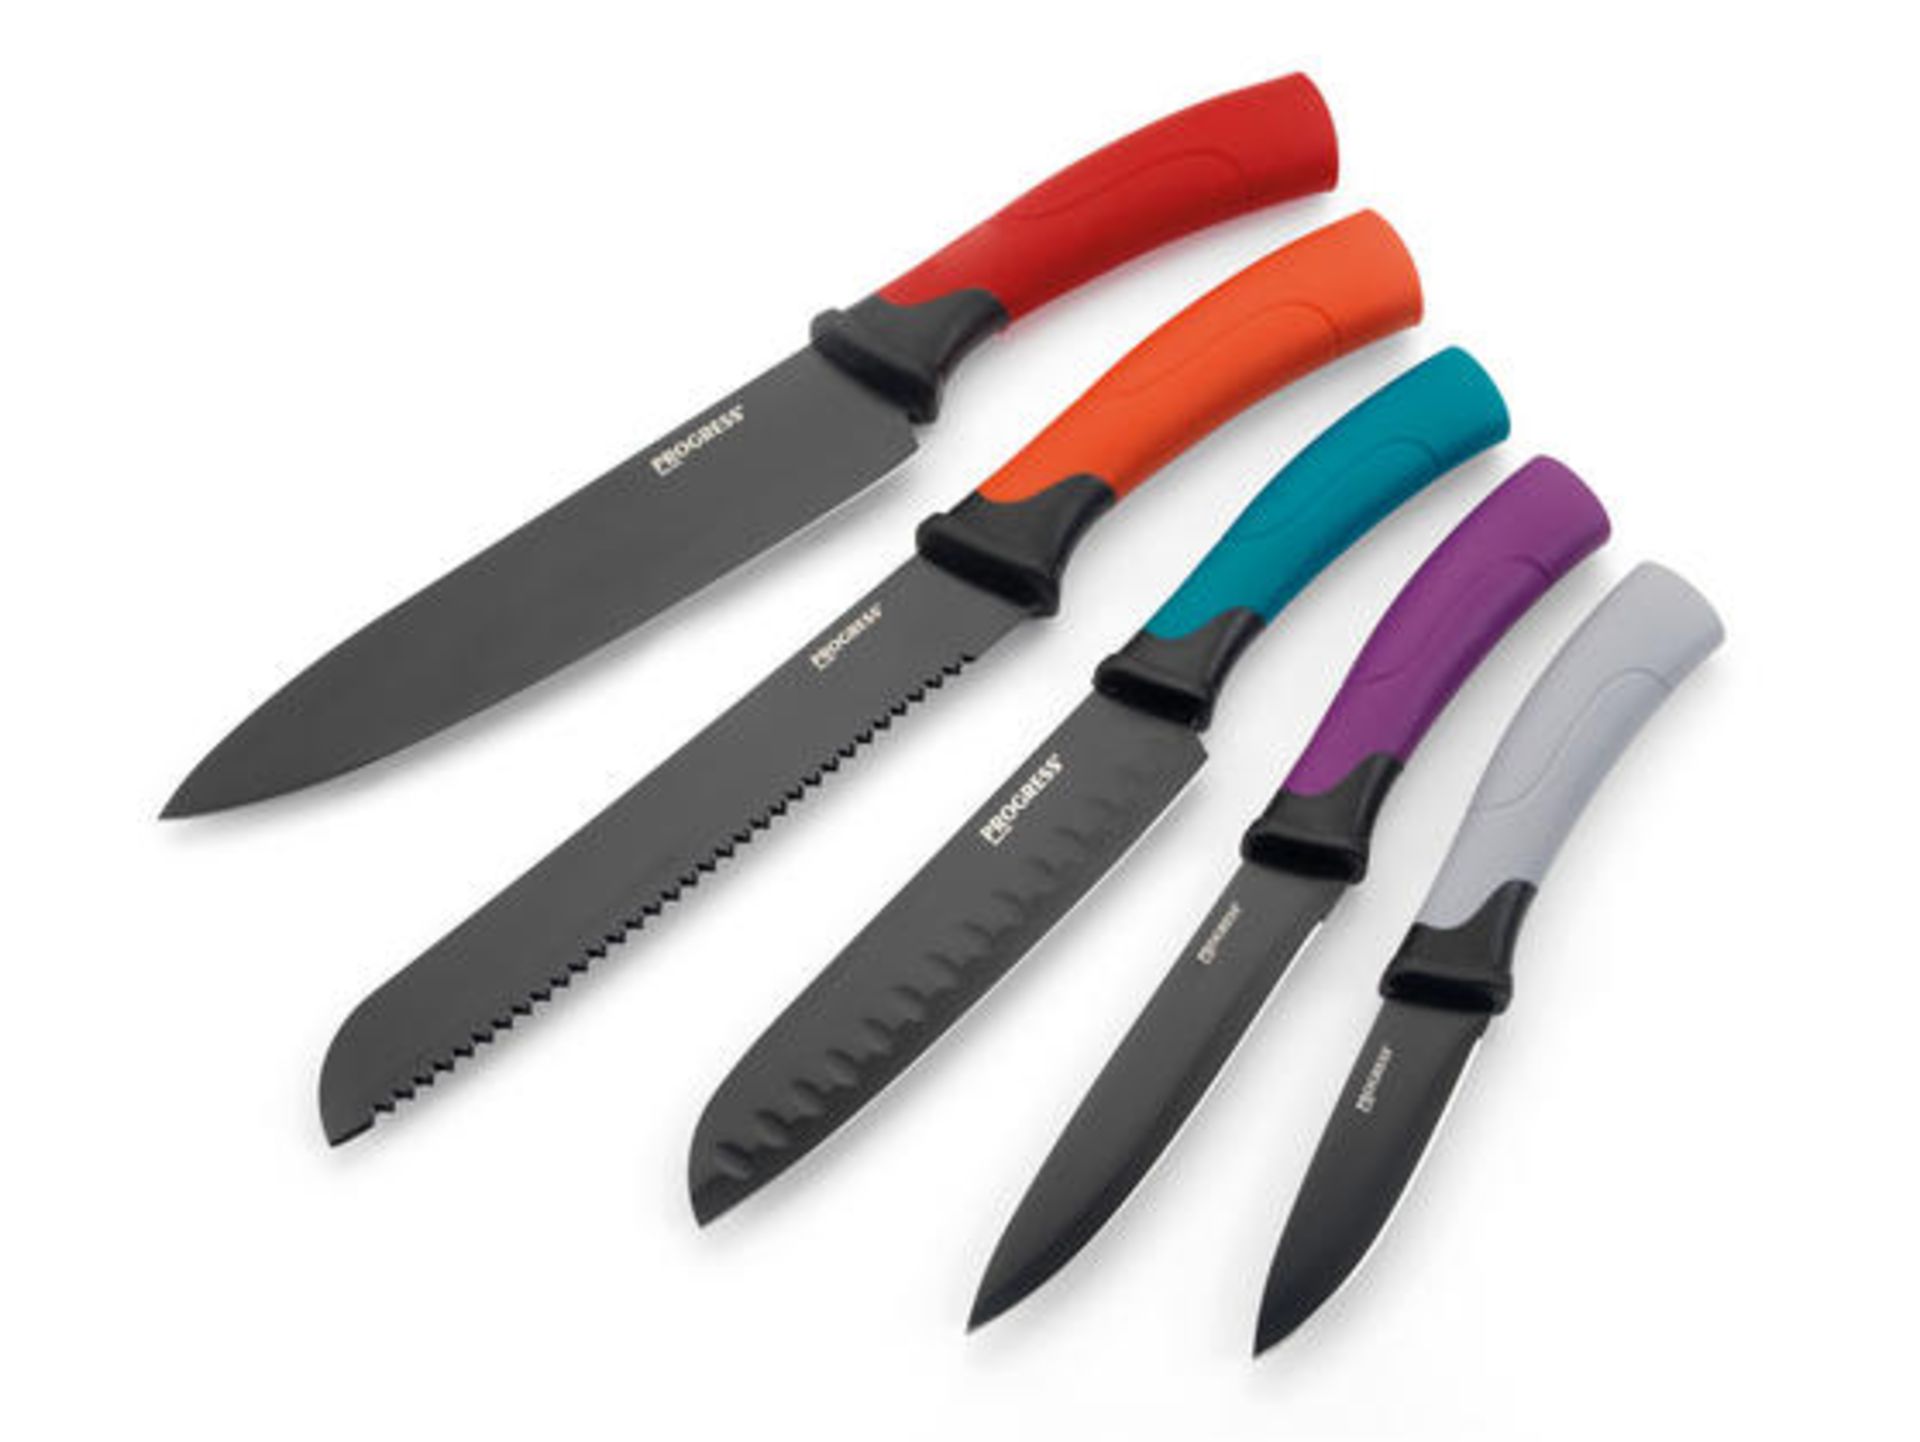 V Brand New Progress 5 Piece Smart Knife Block With Multi Coloured Handles - Secure Block locking - Image 2 of 2